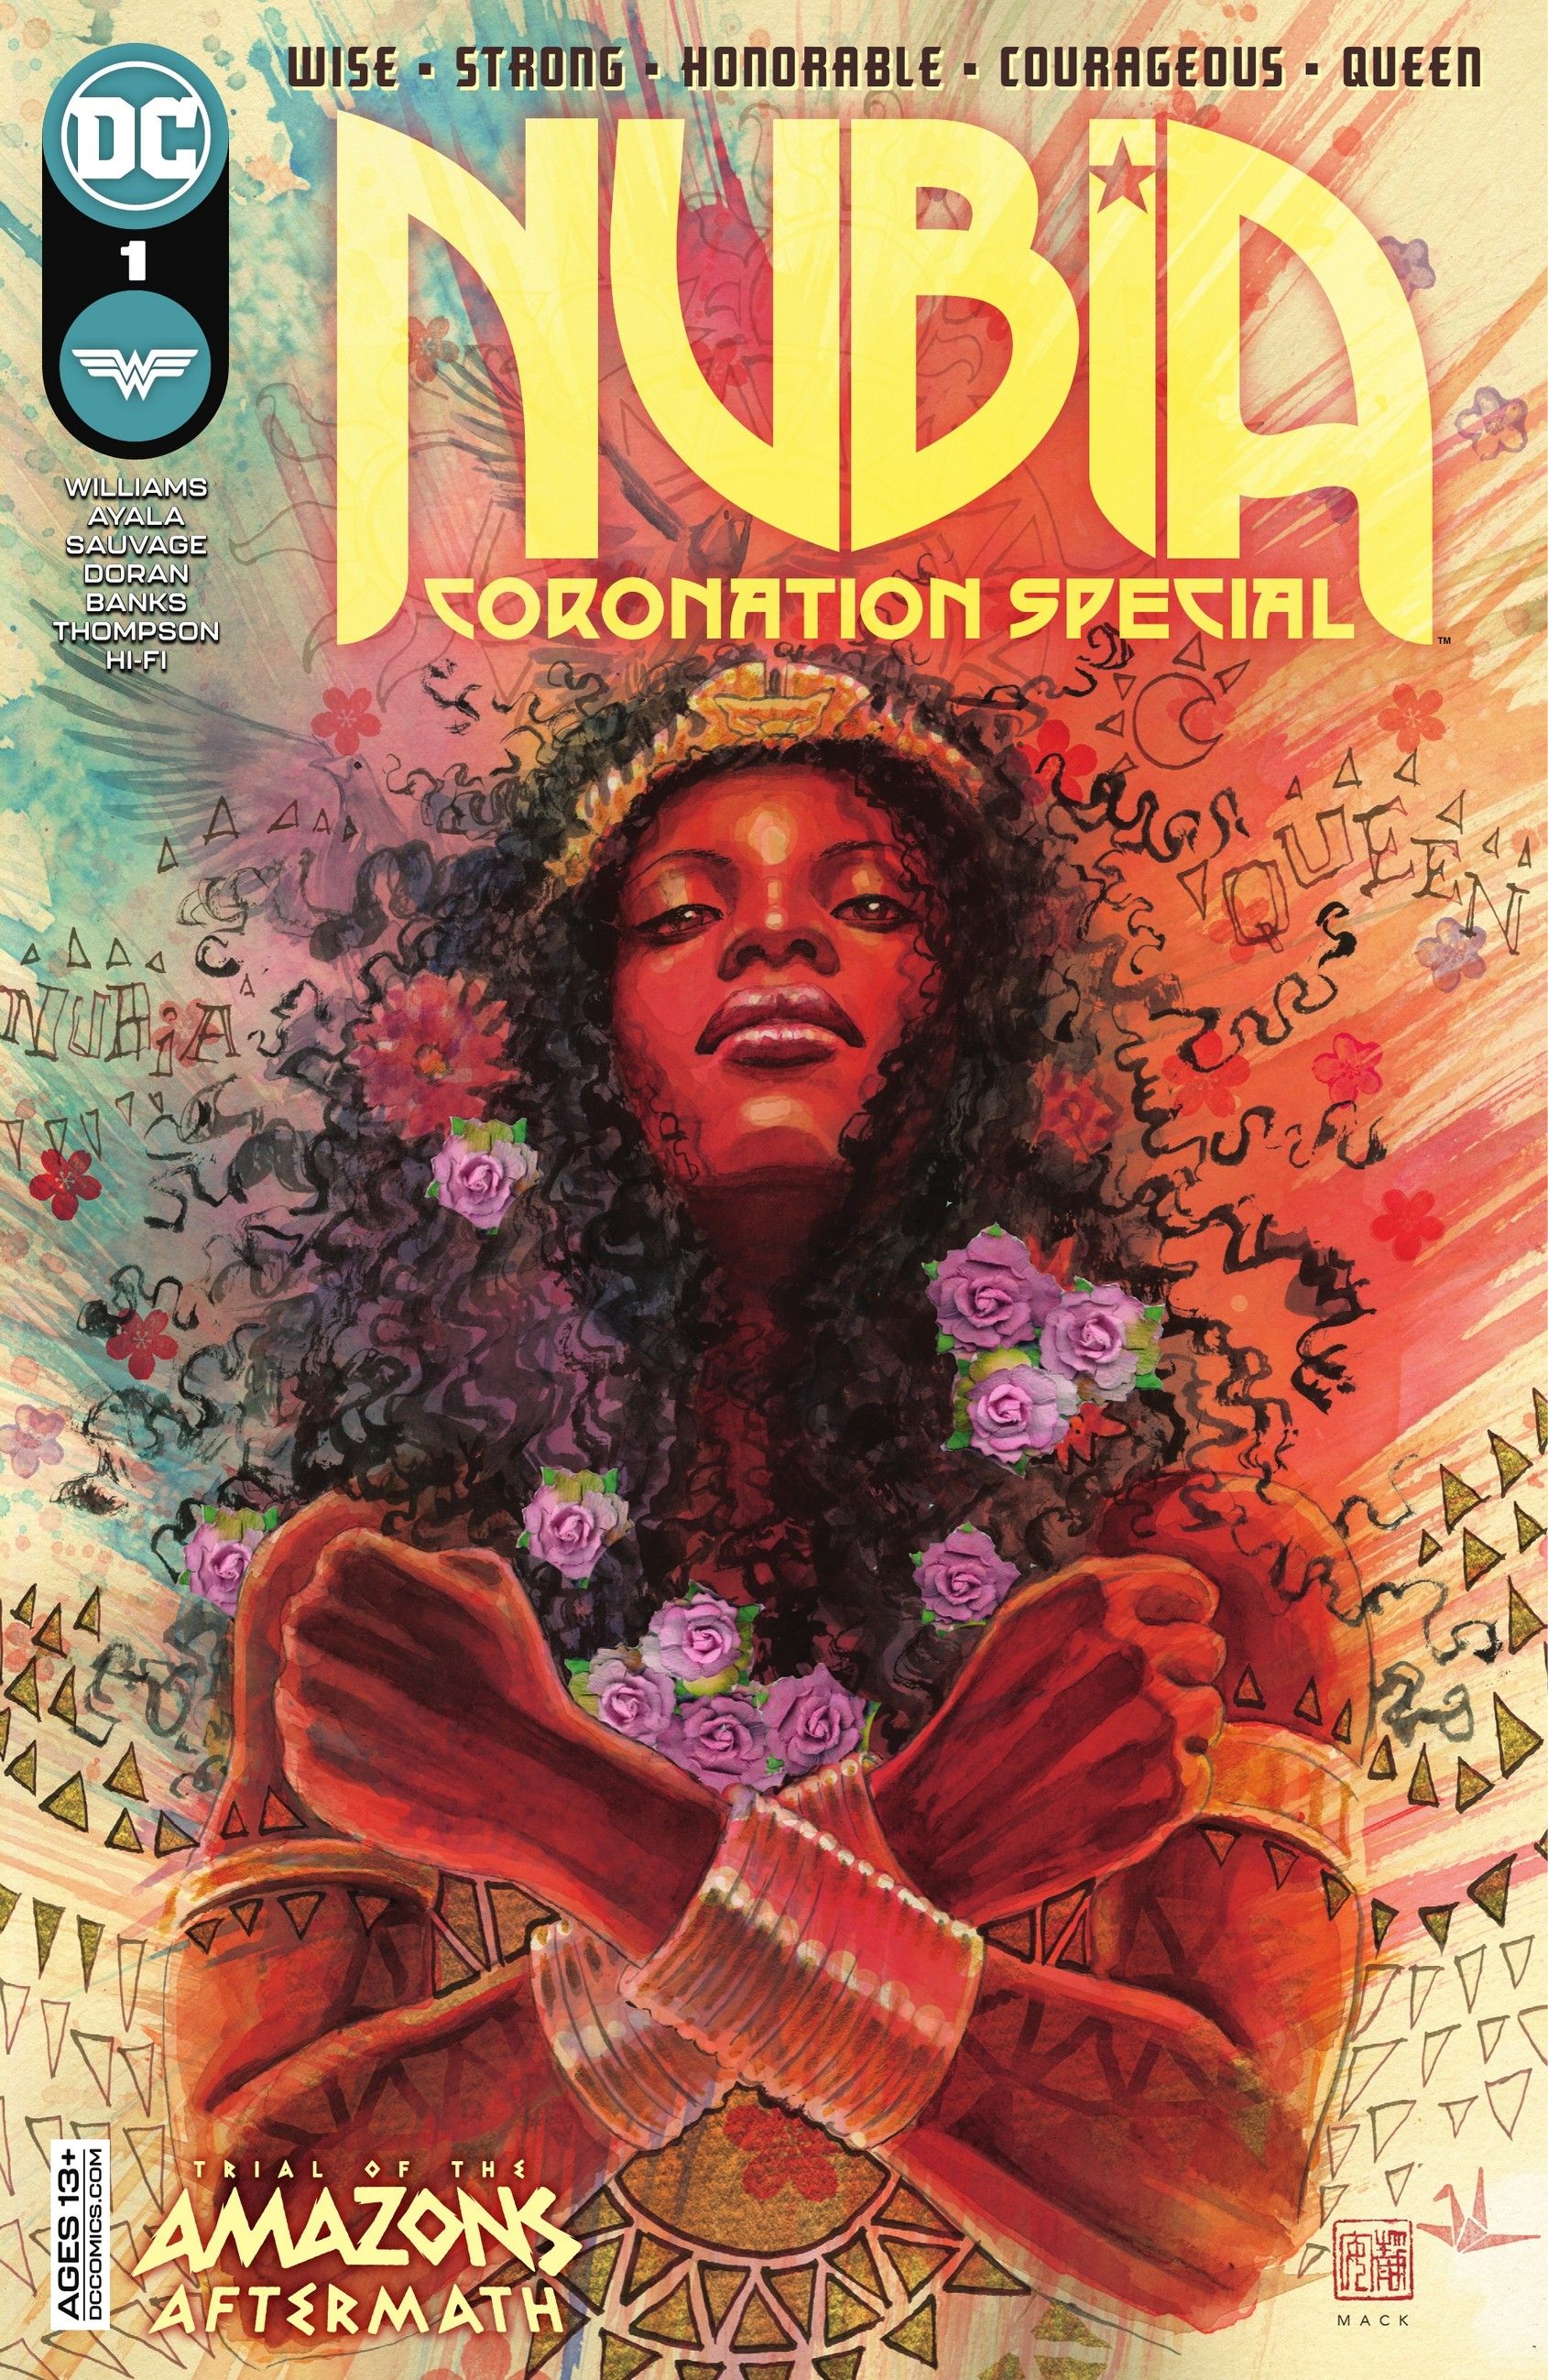 Cover of Nubia Coronation Special #1 